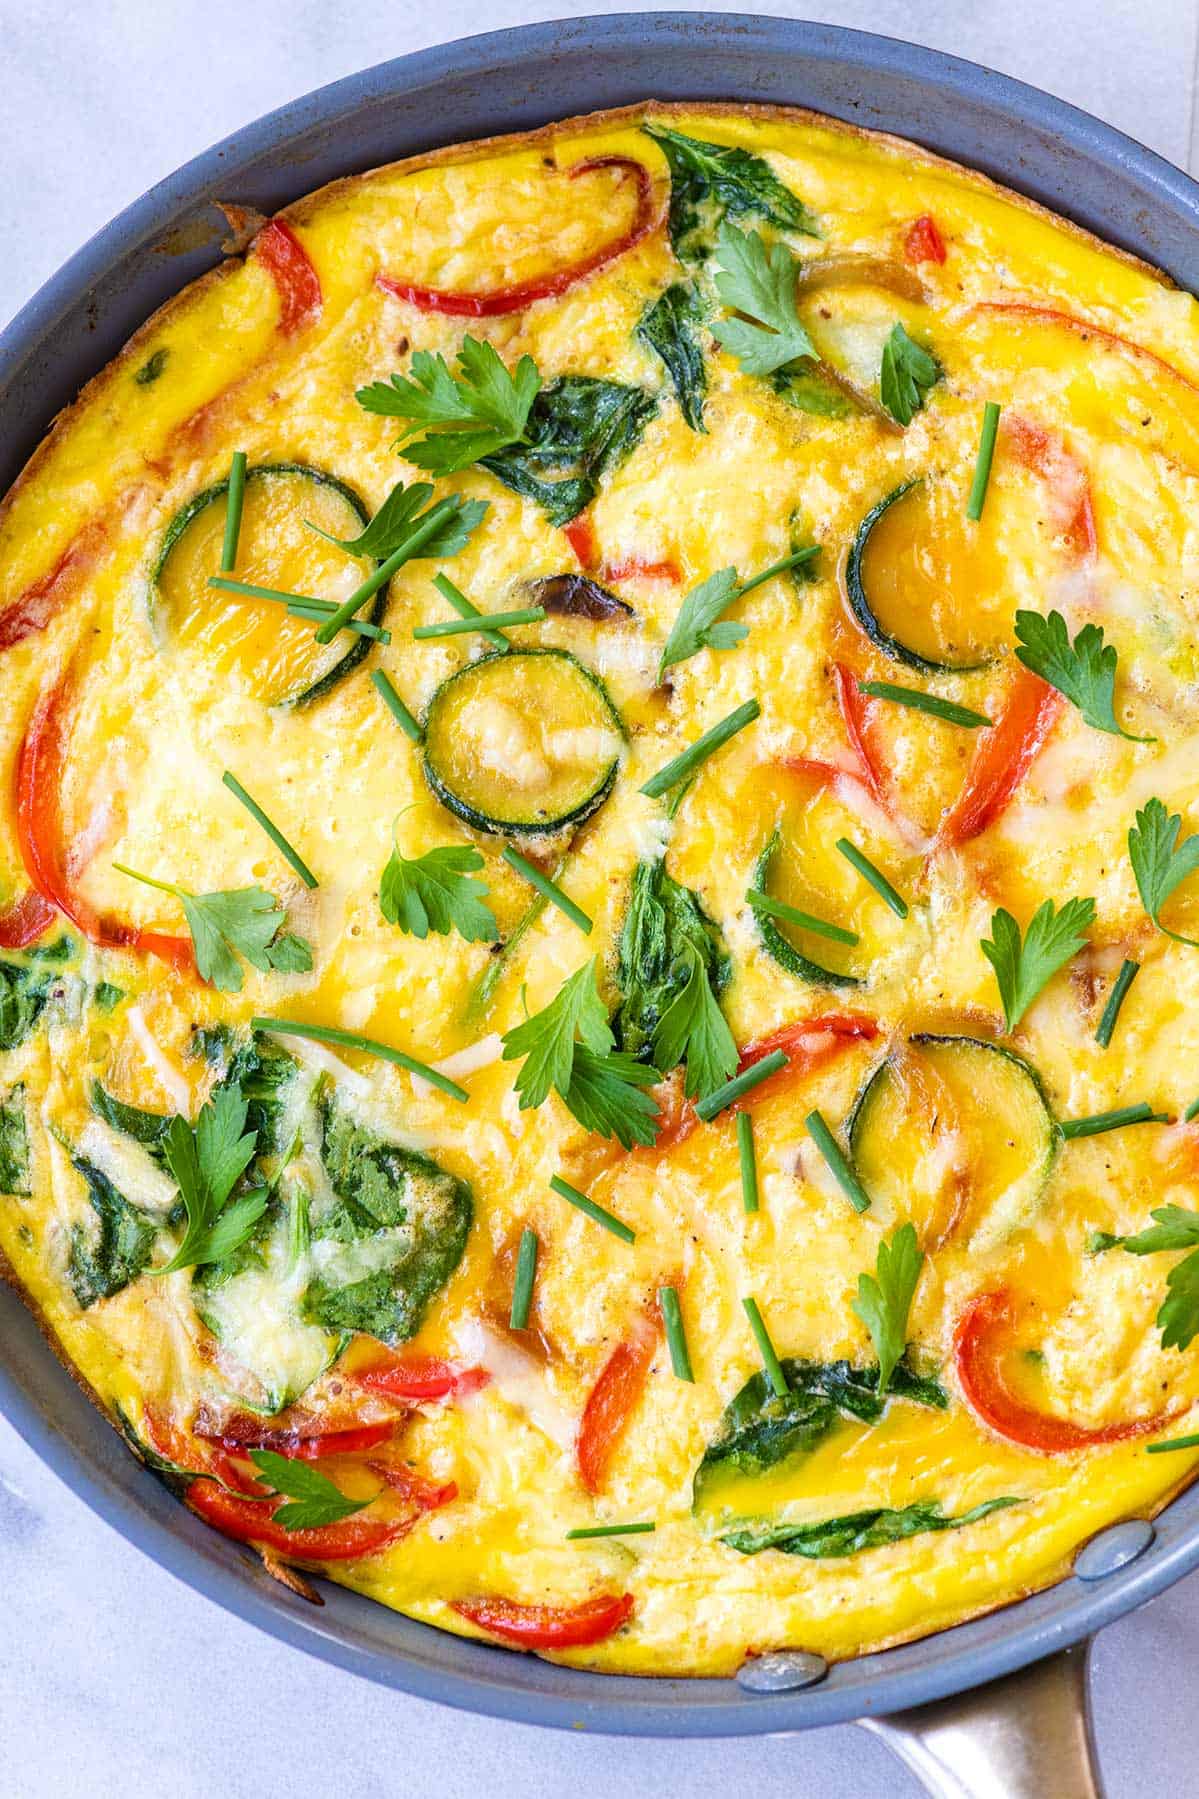 How to Make the Best Vegetable Frittata